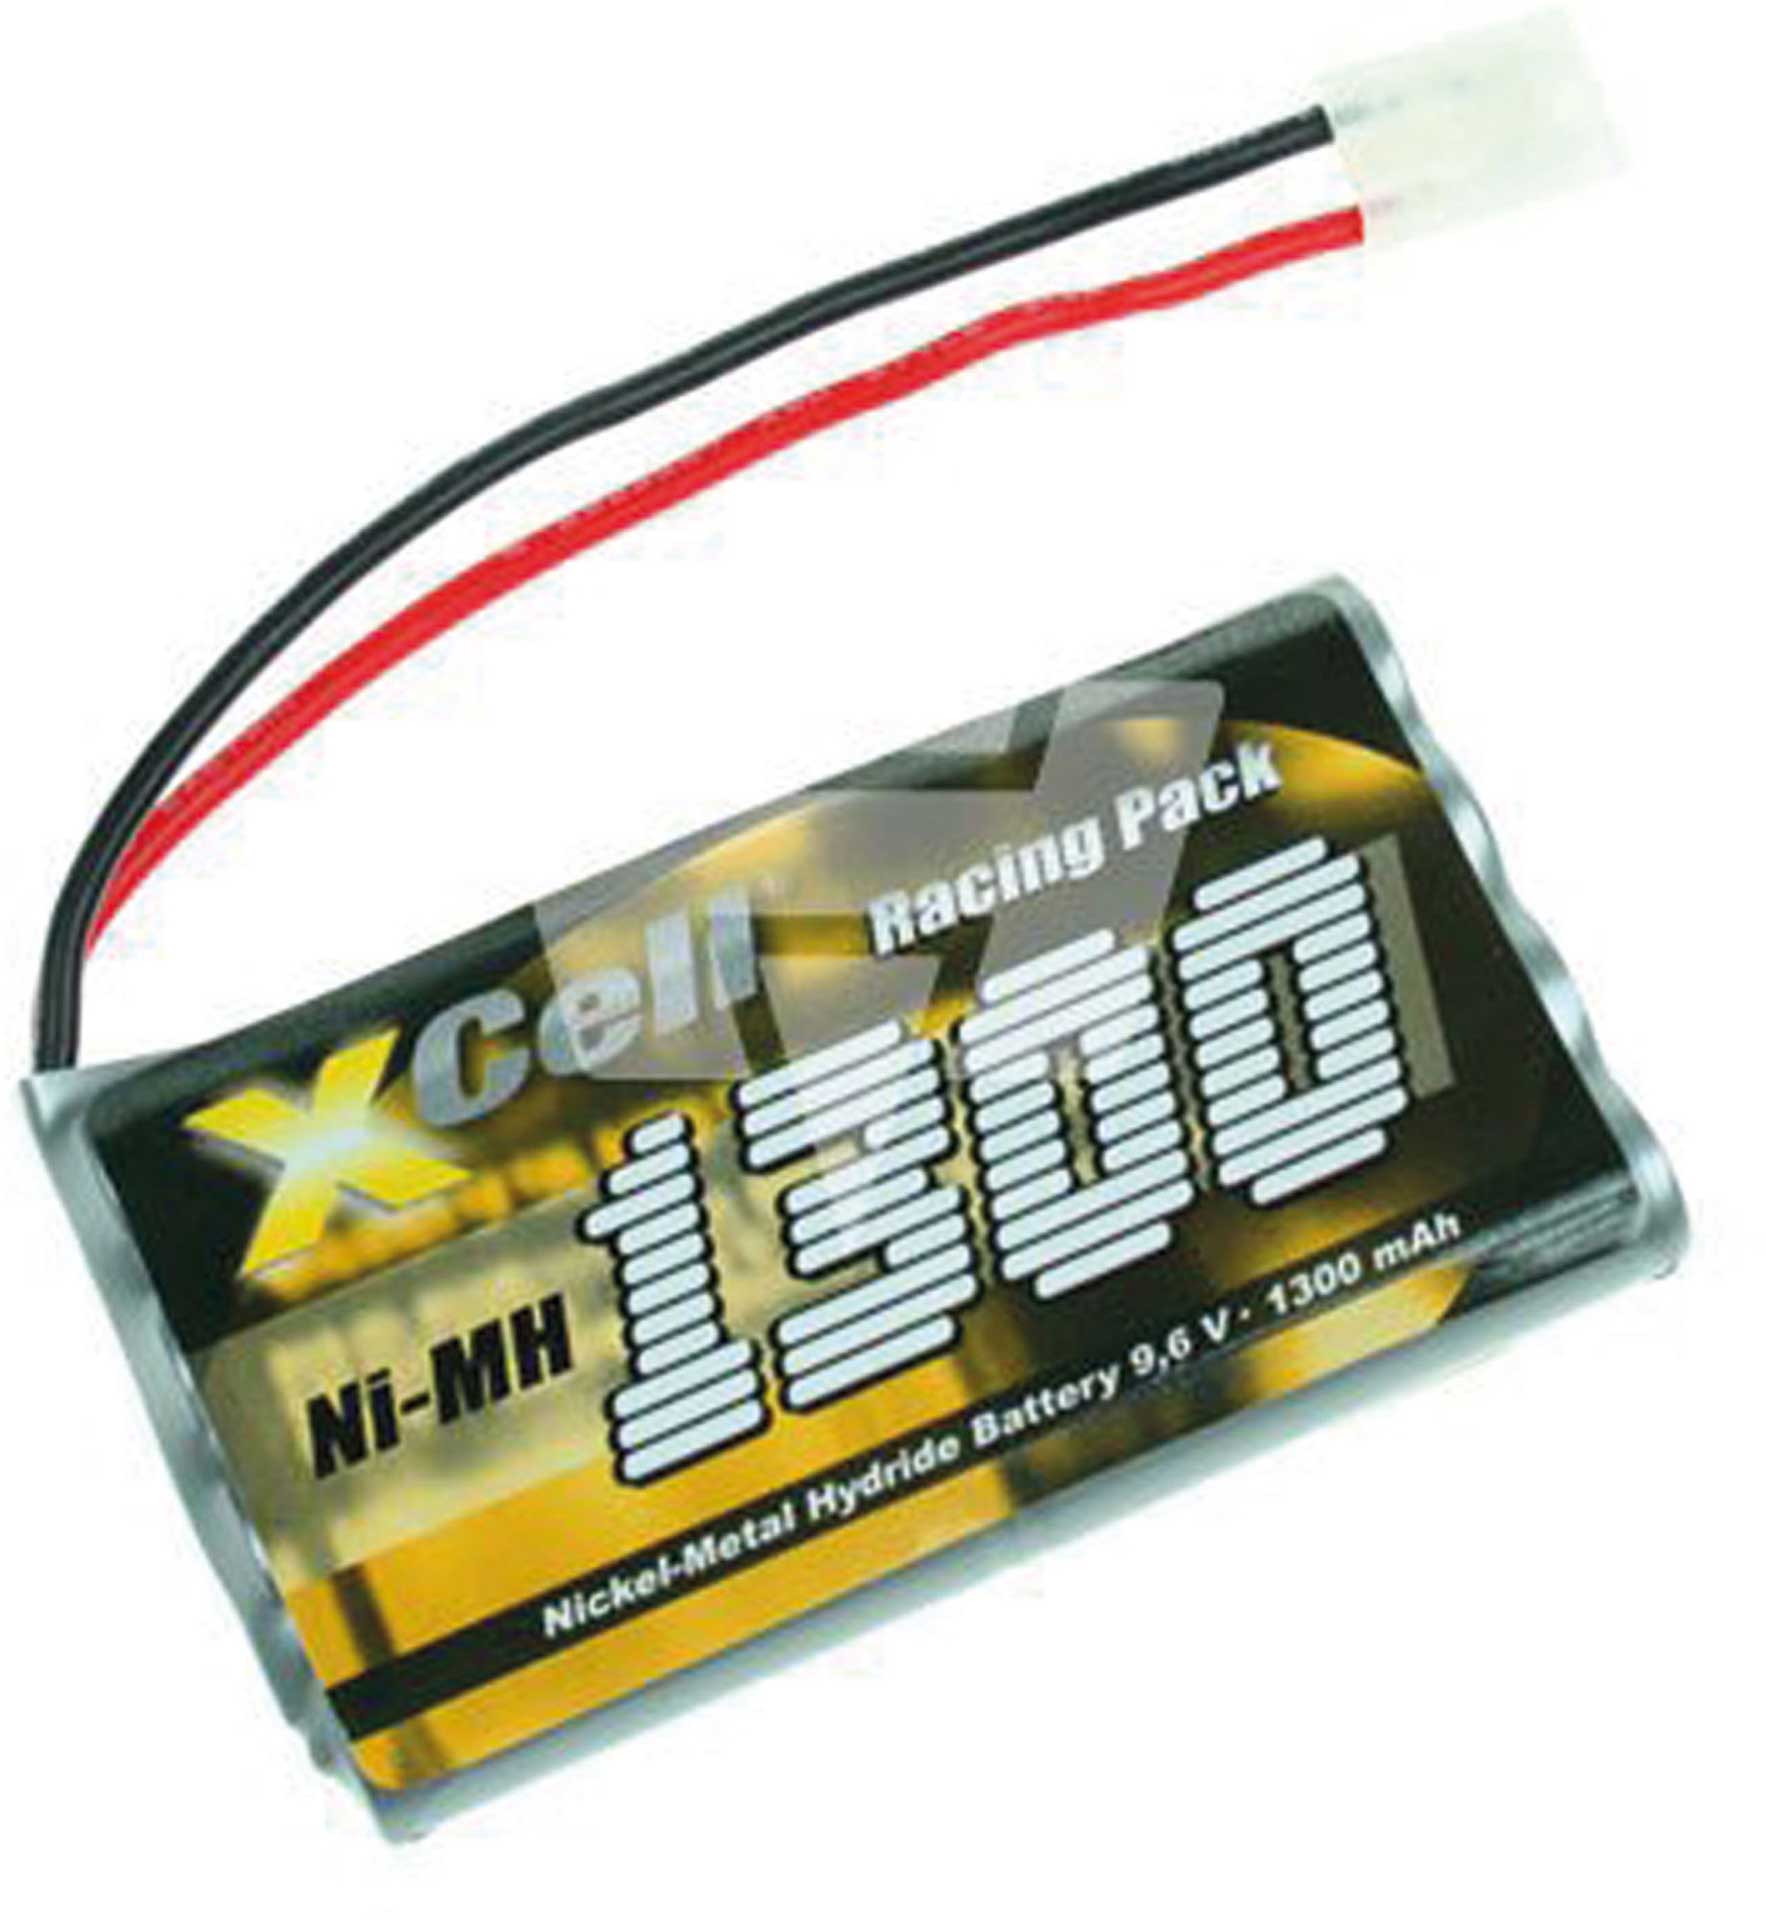 XCELL NICD BATTERY PACK 9.6 VOLT/1300 MAH  FOR QUICK DRIVE MODELS